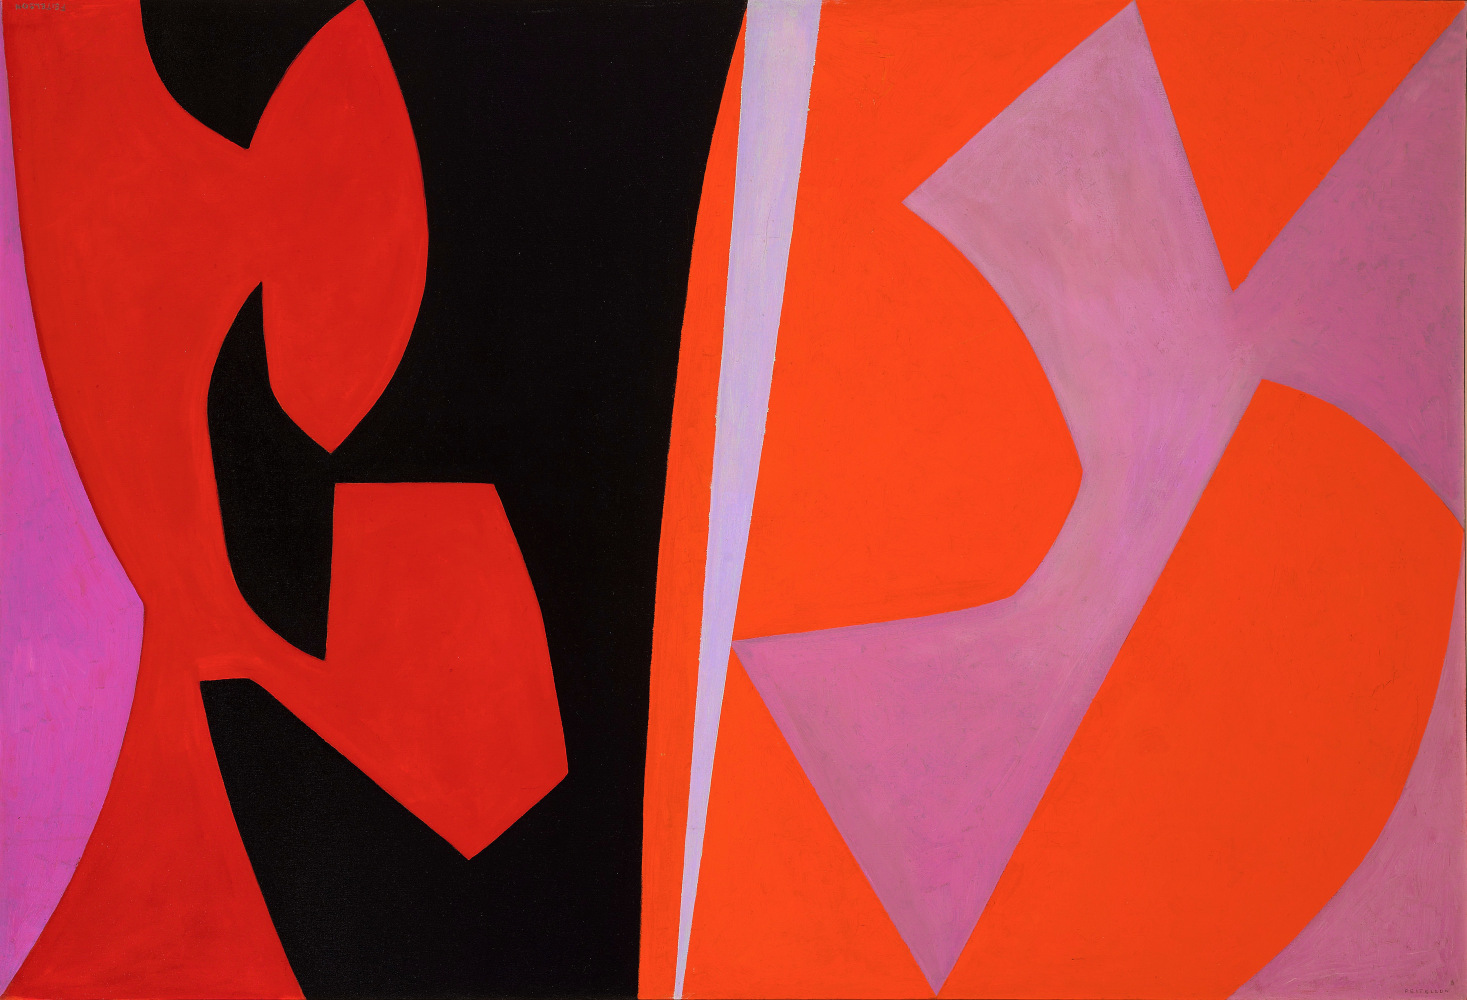 Magical Space Forms, 1952 - 1954 oil on canvas 45 x 66 inches; 114.3 x 167.6 centimeters LSFA #00112